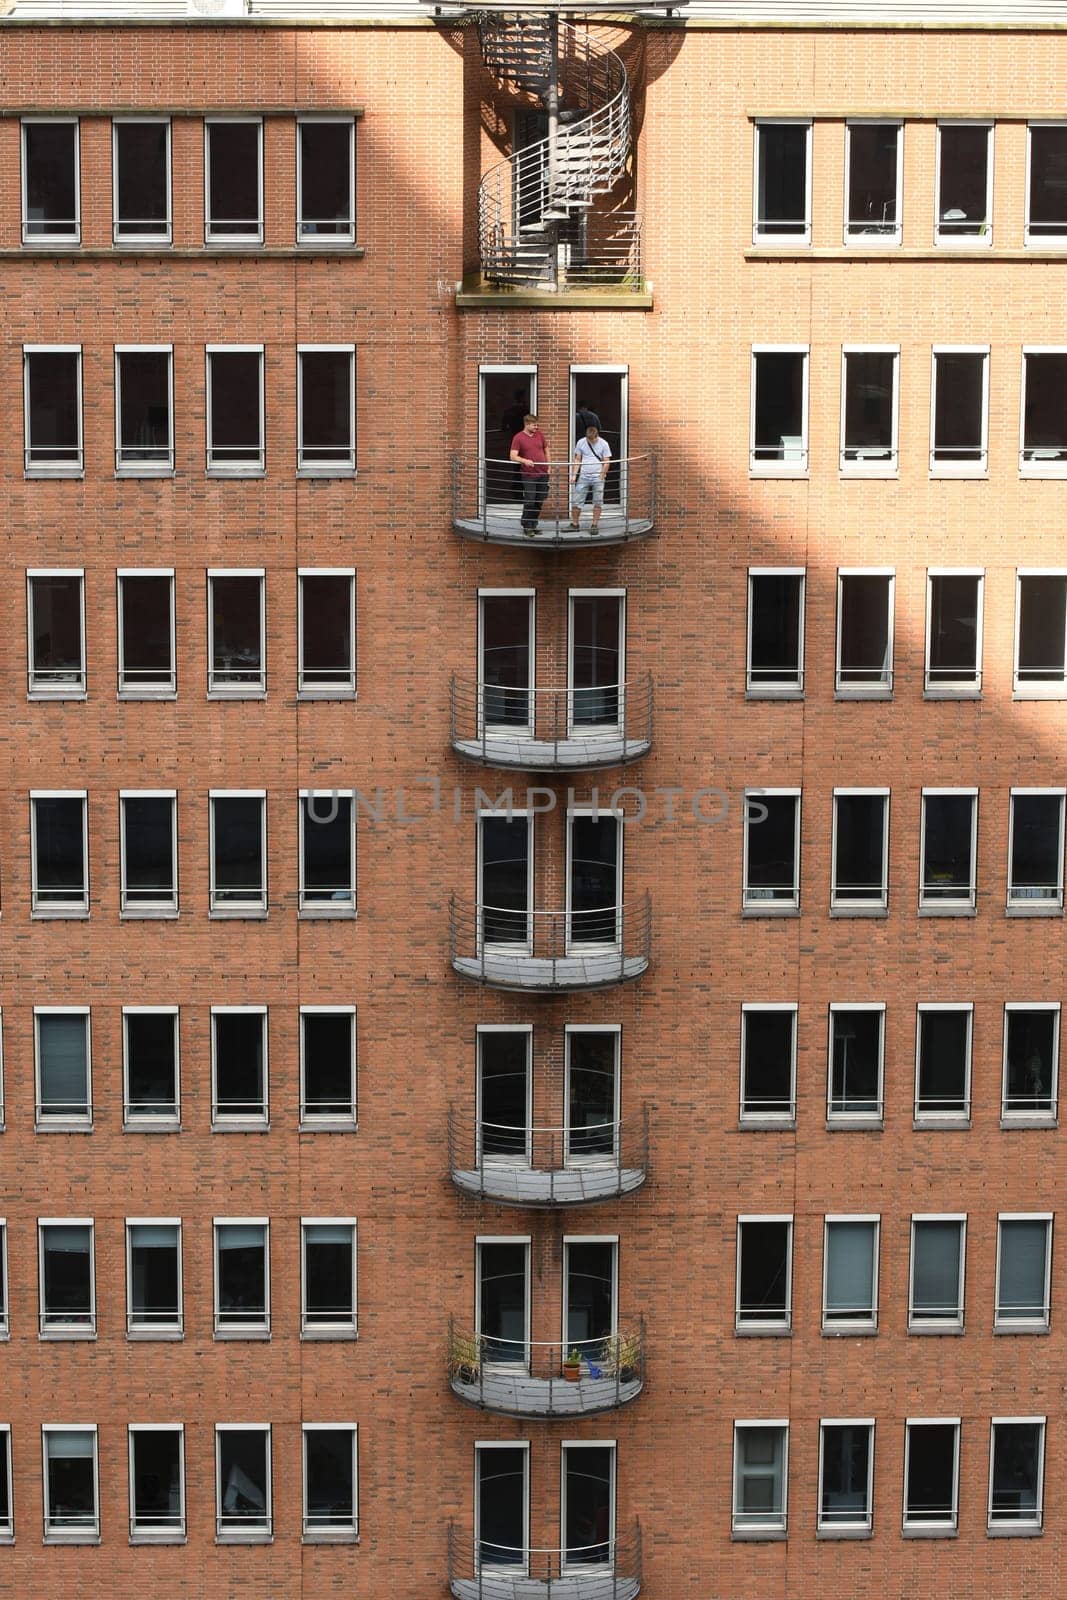 Vertical view of two men standing on the balcony of a brick-built building in Hamburg, Germany